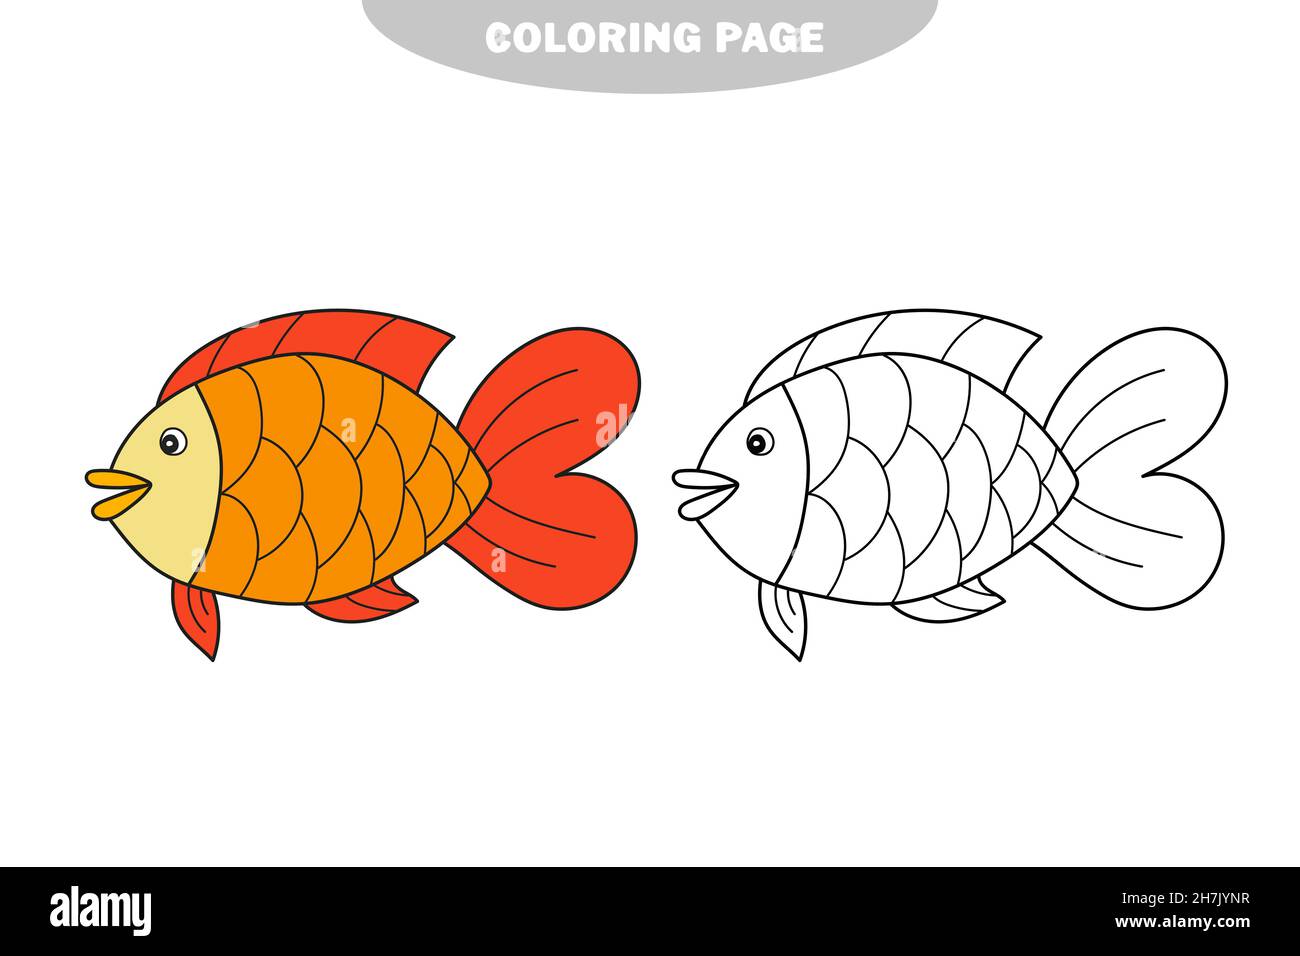 Simple coloring page drawing worksheet for preschool kids with easy gaming level